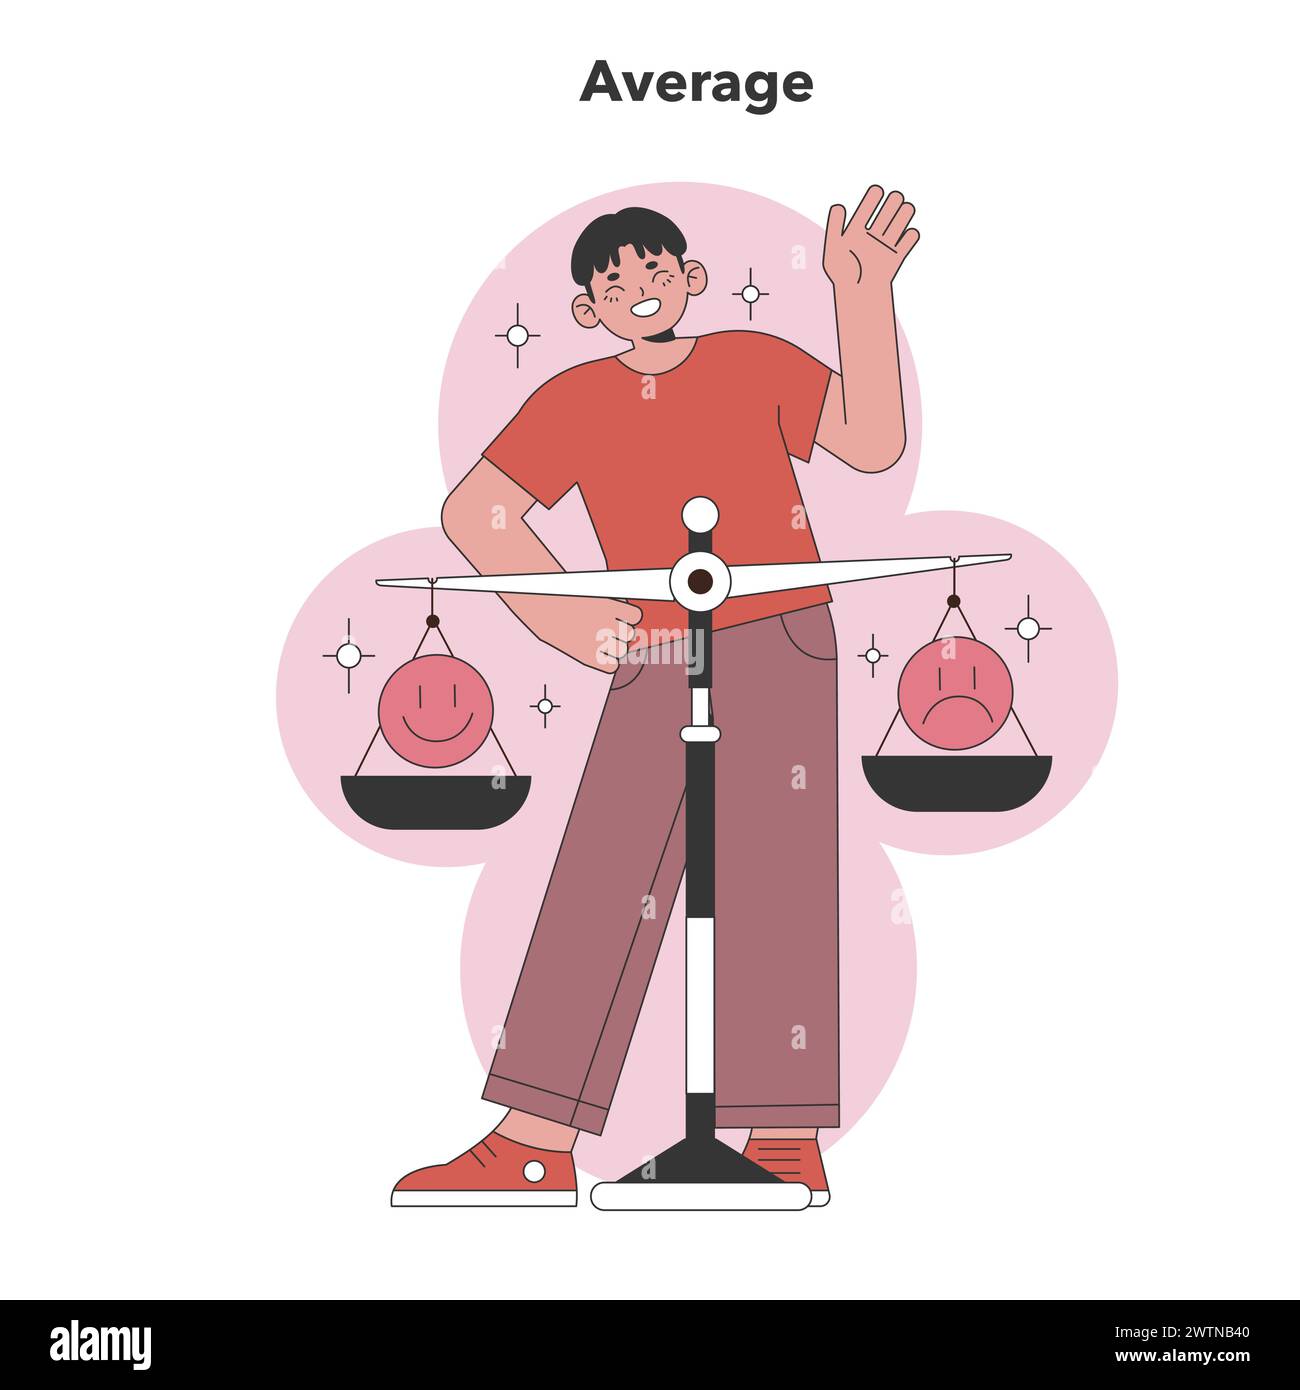 Average personality trait in Big Five. Balanced character weighing emotions and reactions, embodying a stable temperament. Flat vector illustration Stock Vector